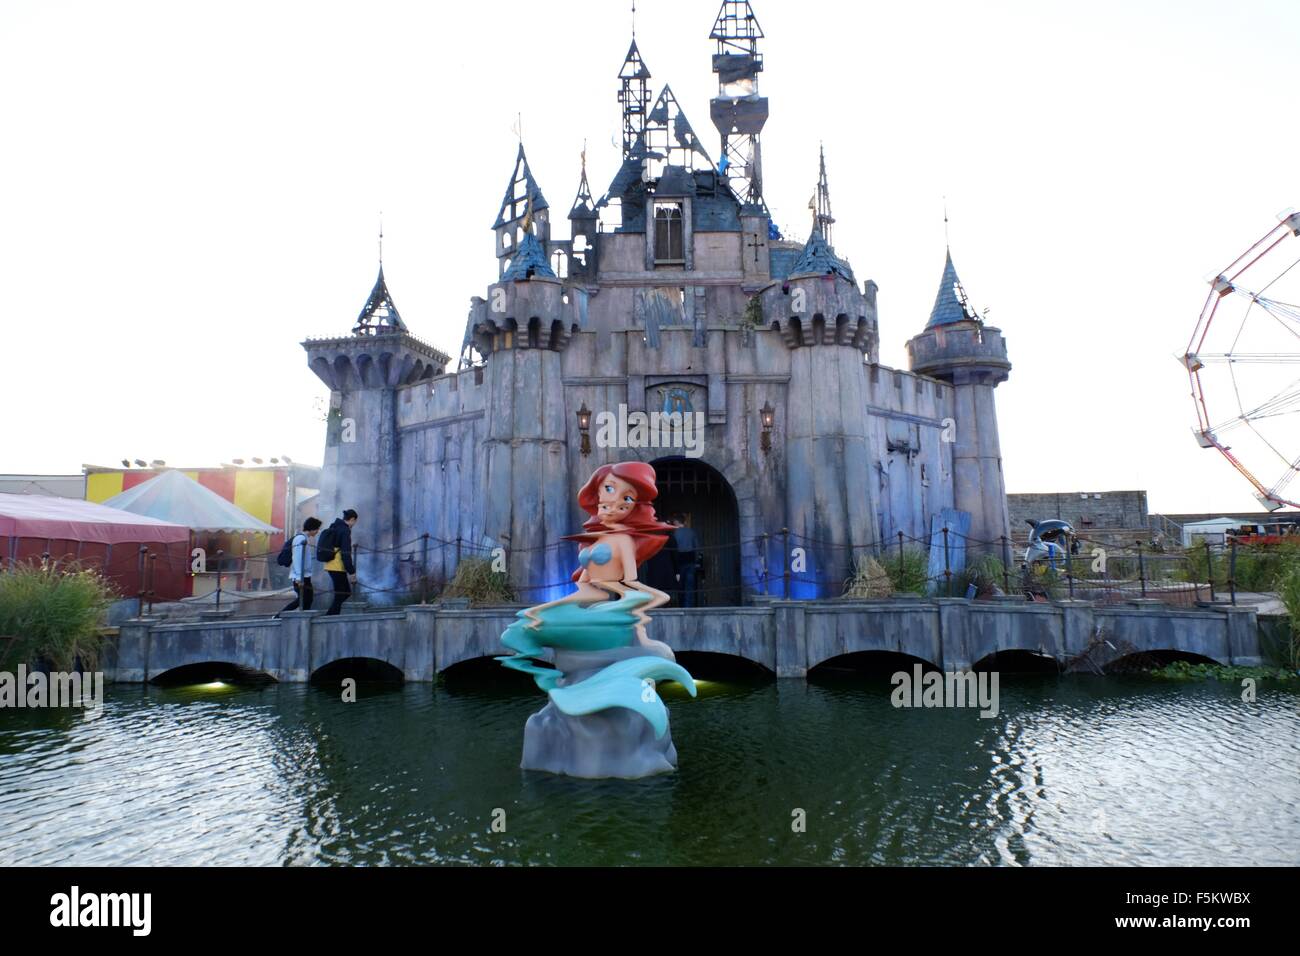 Welcome To Dismaland A First Look At Banksy S New Art Exhibition